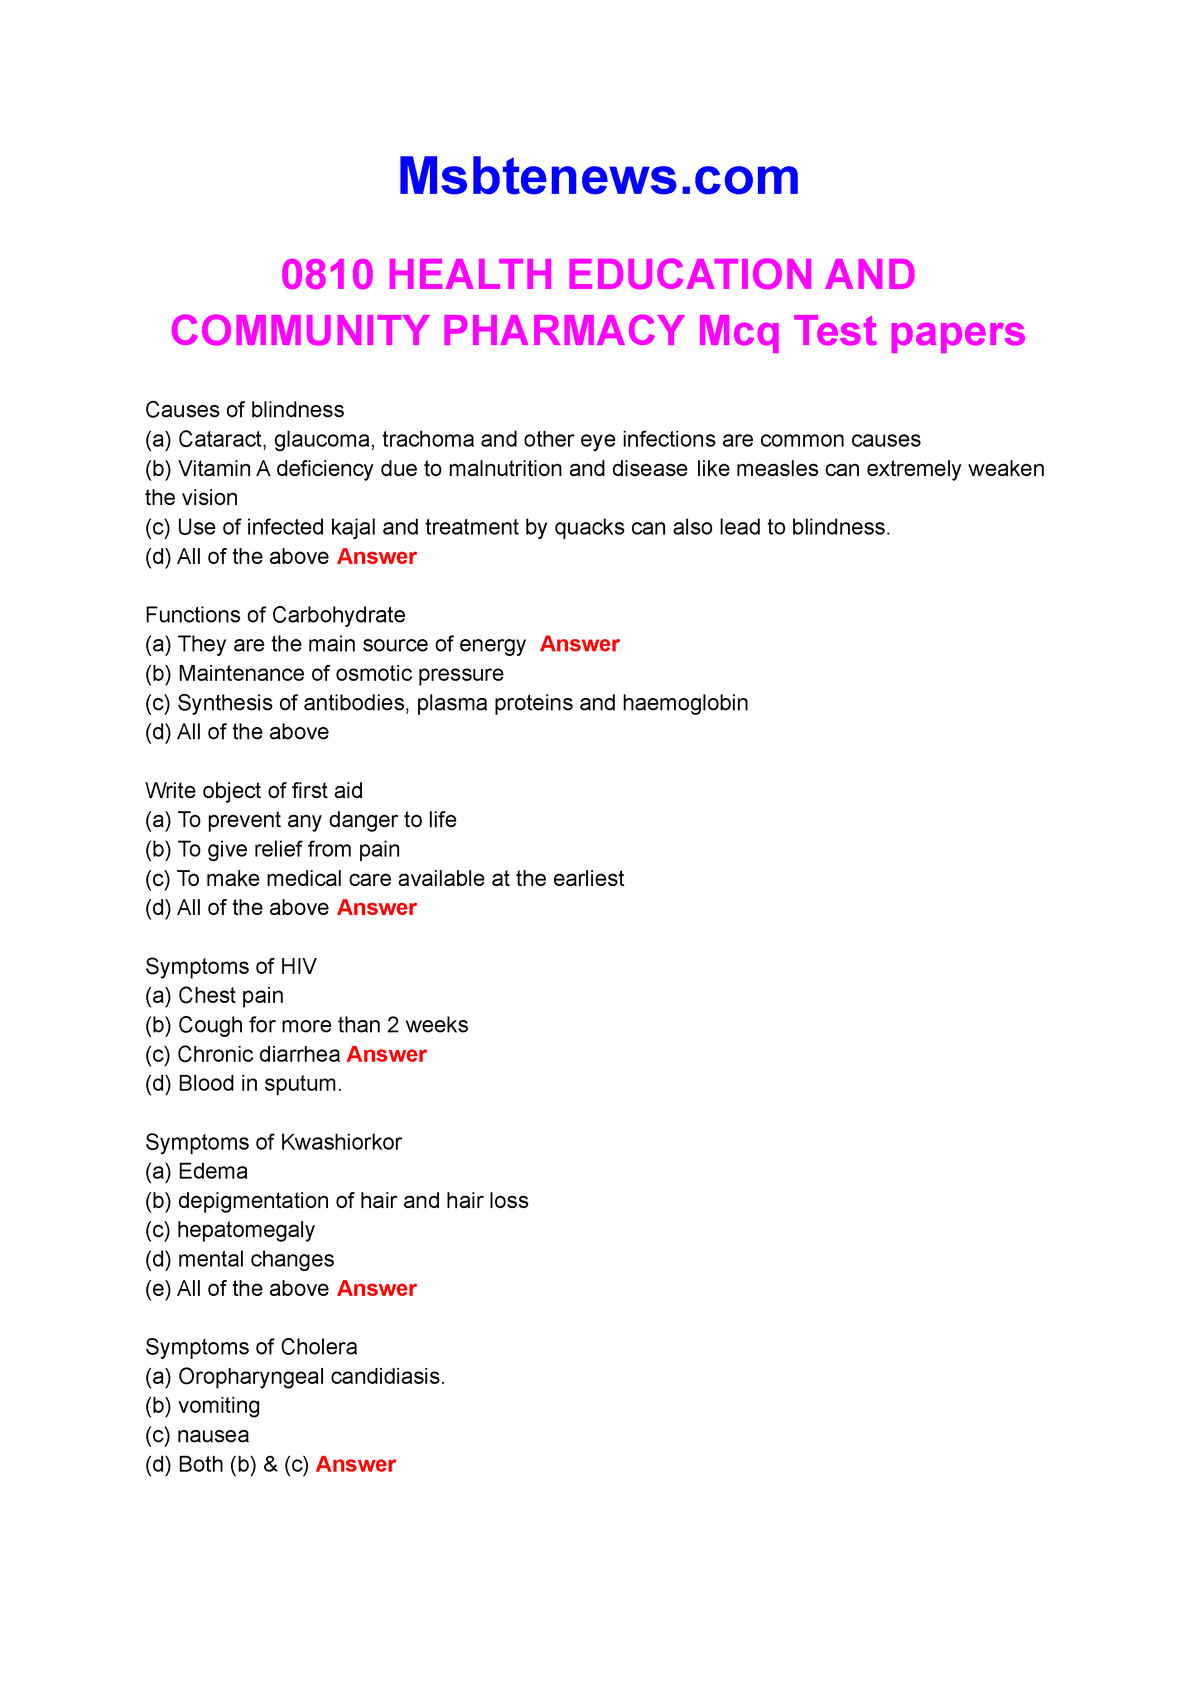 research questions on health education